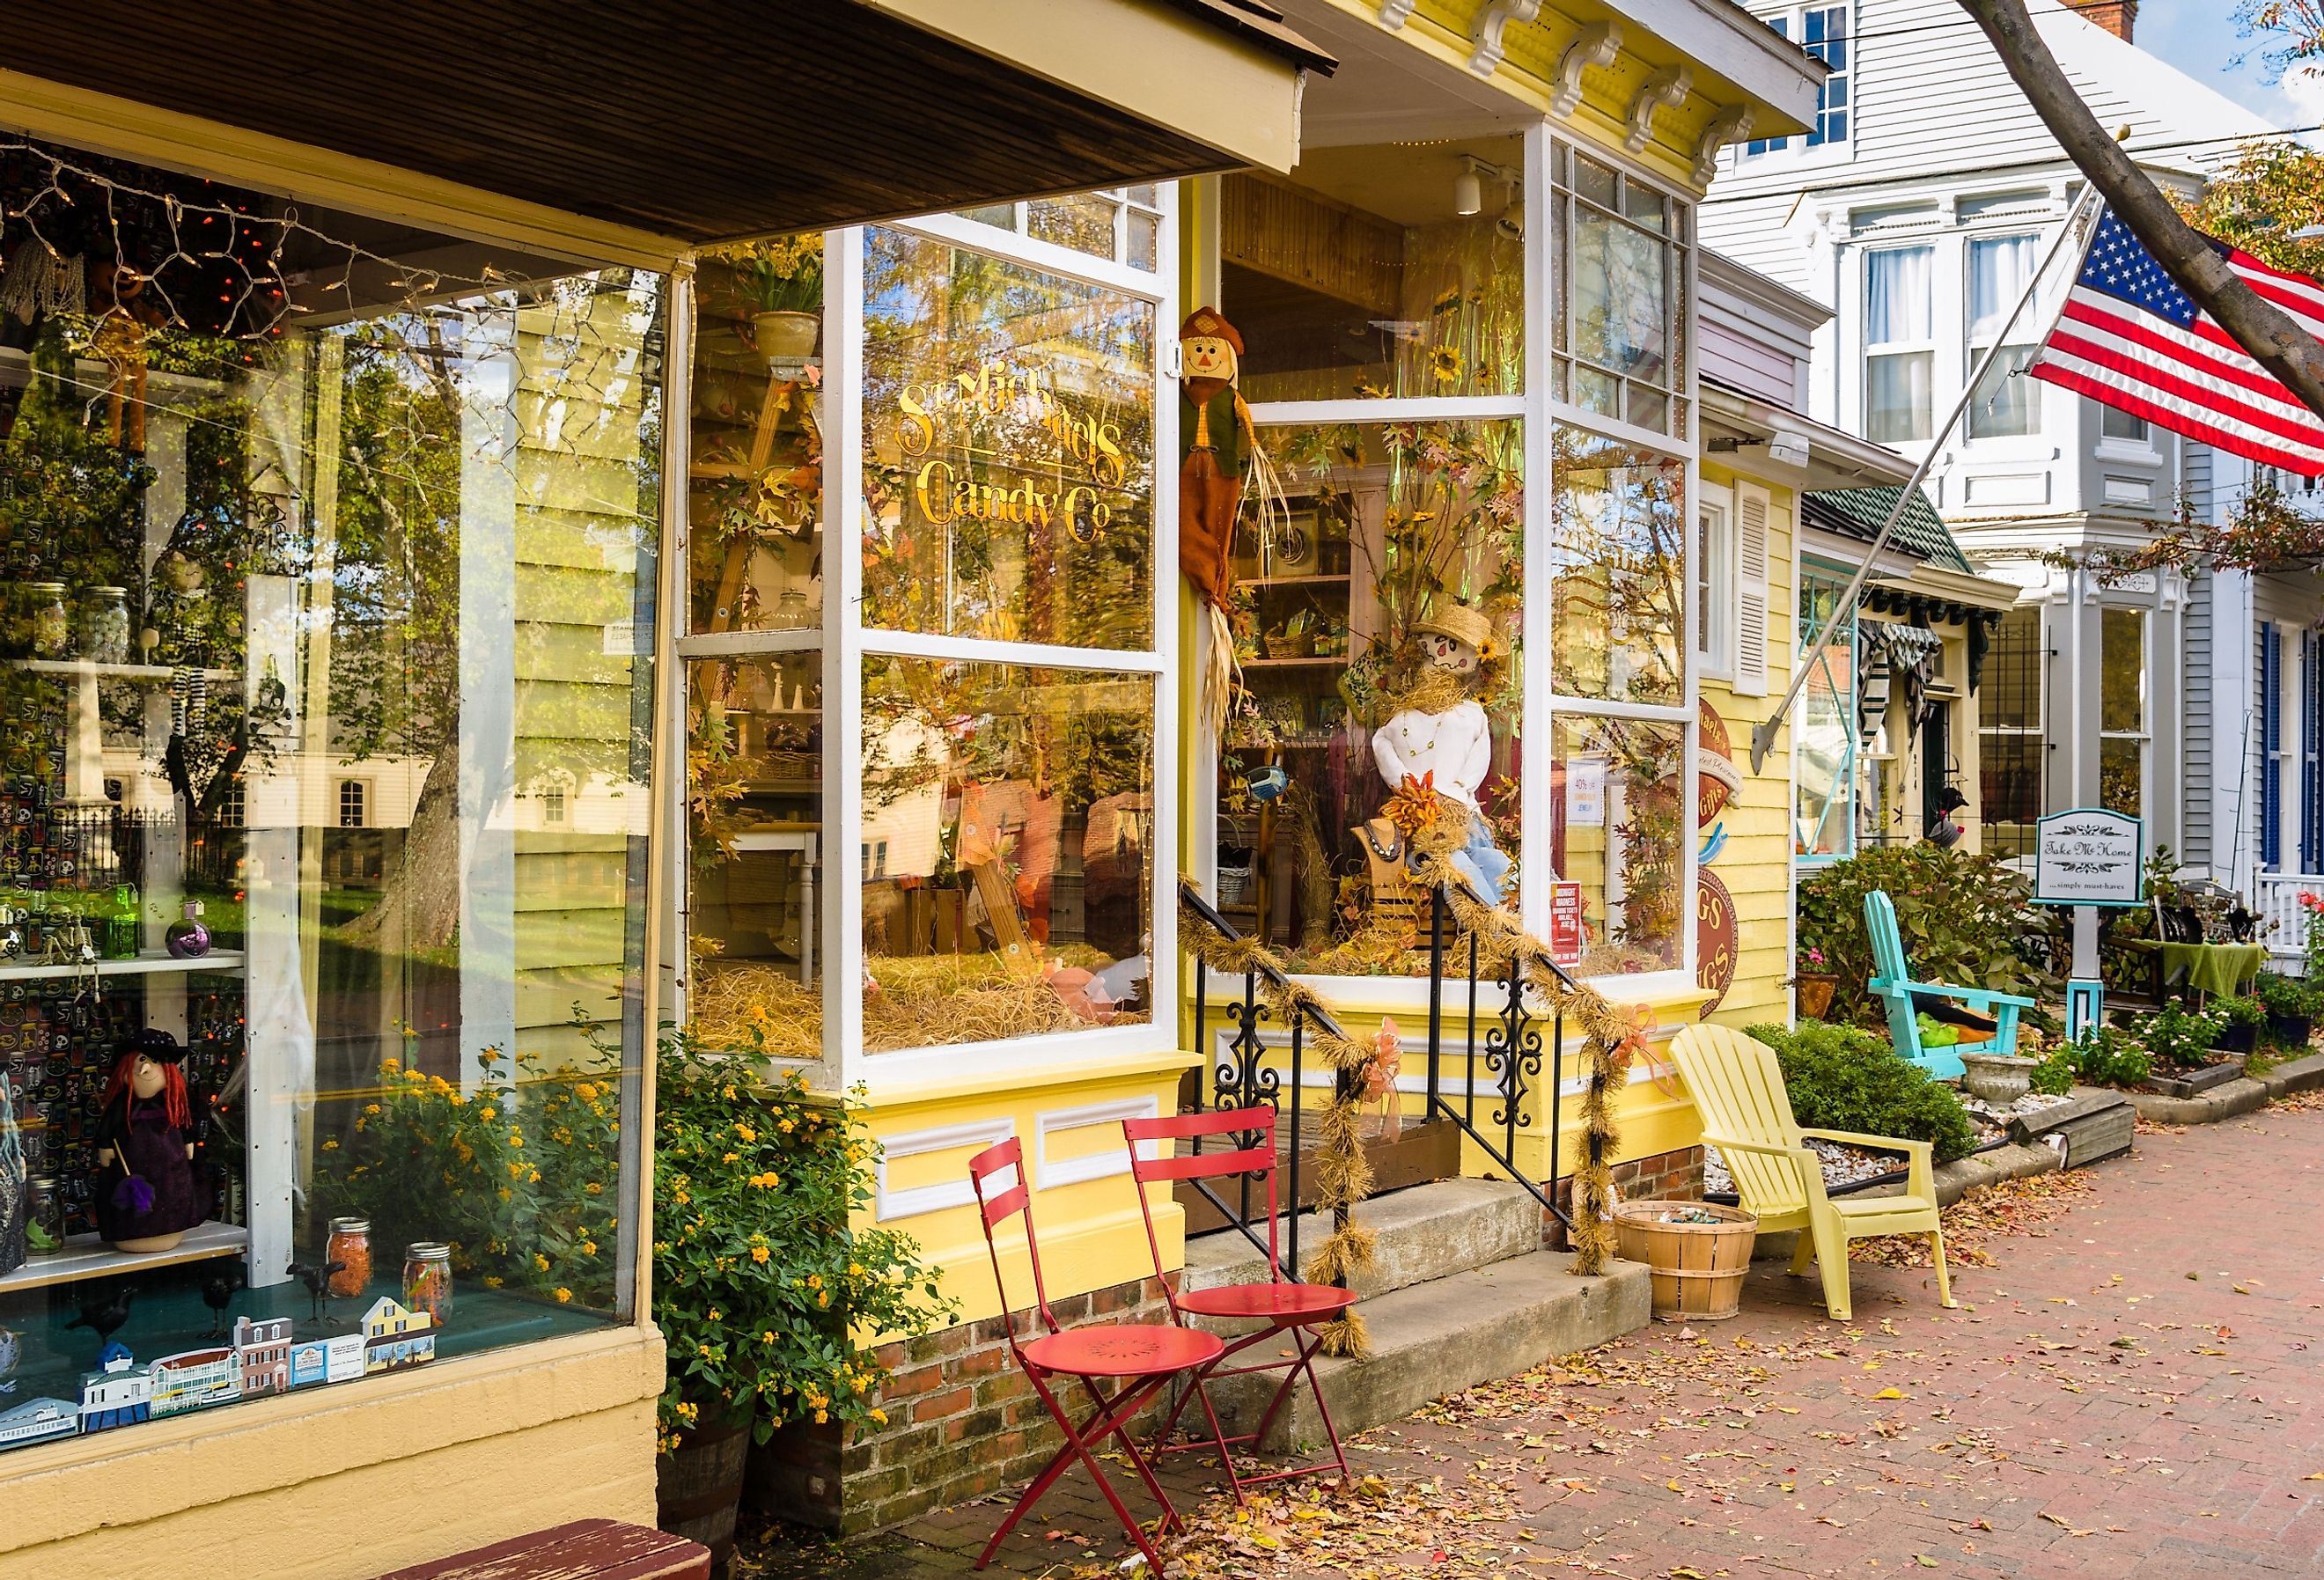 Storefronts on Talbot Street. in St. Michaels, Maryland. Image credit Albert Pego via Shutterstock.